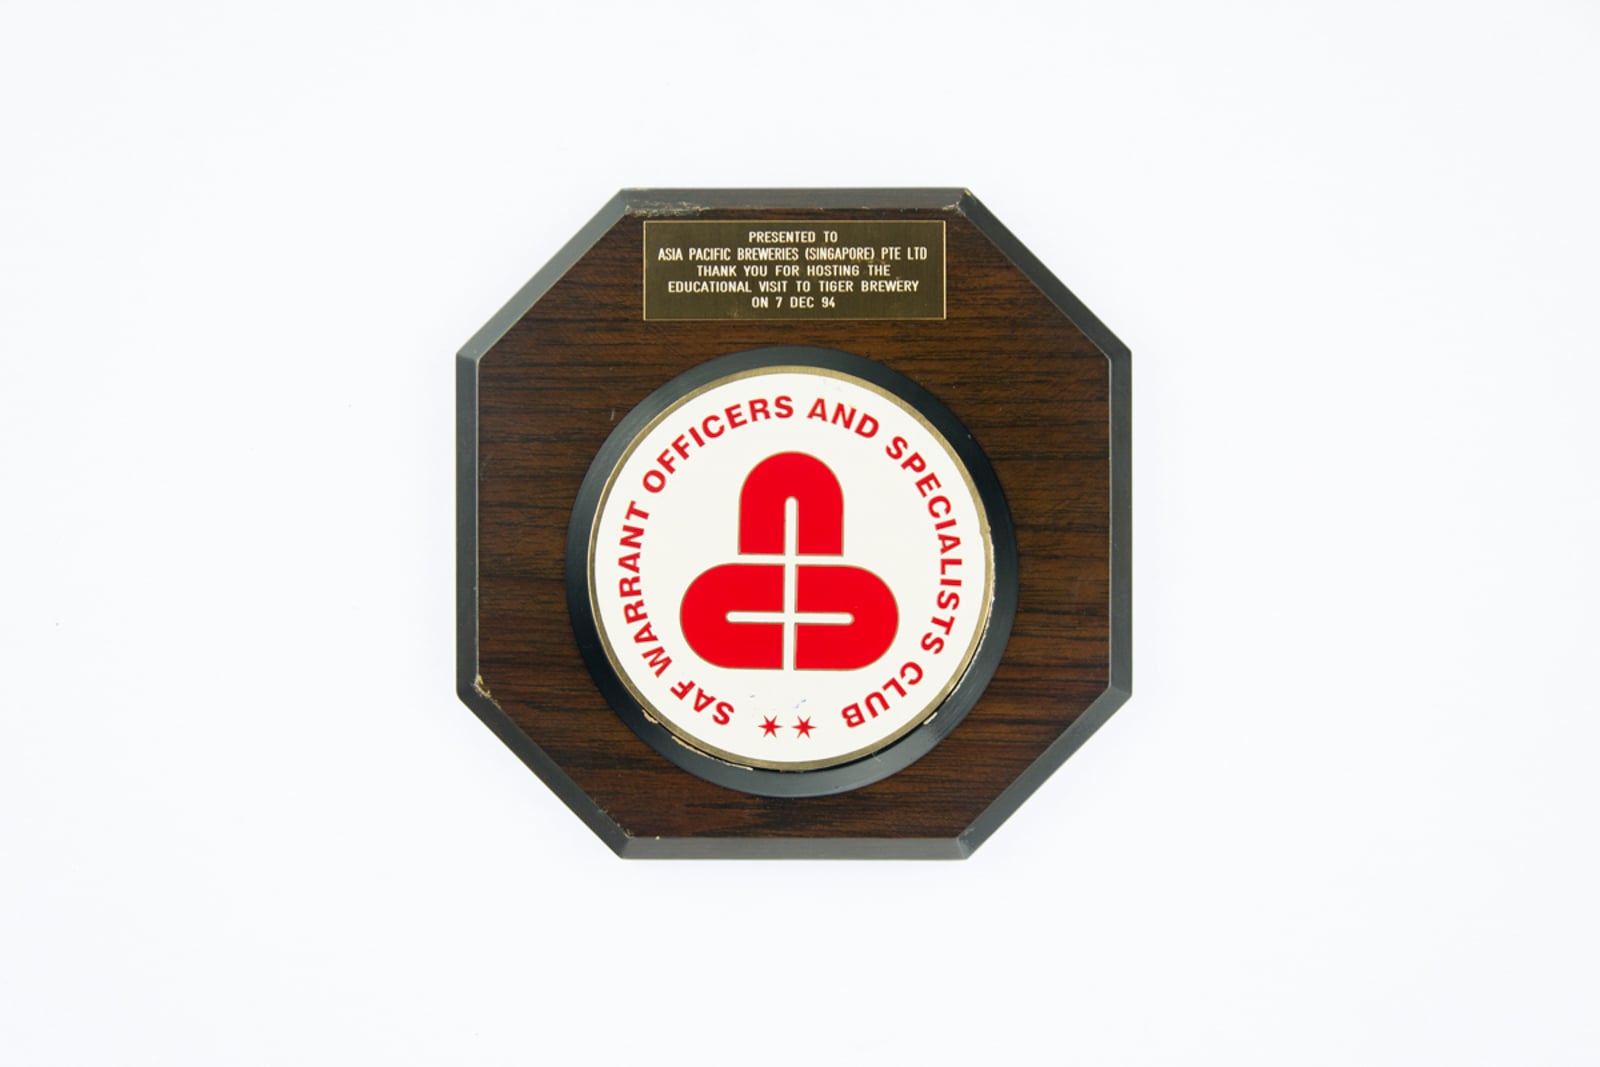 SAF Warrant Officers and Specialists Club Plaque 1994